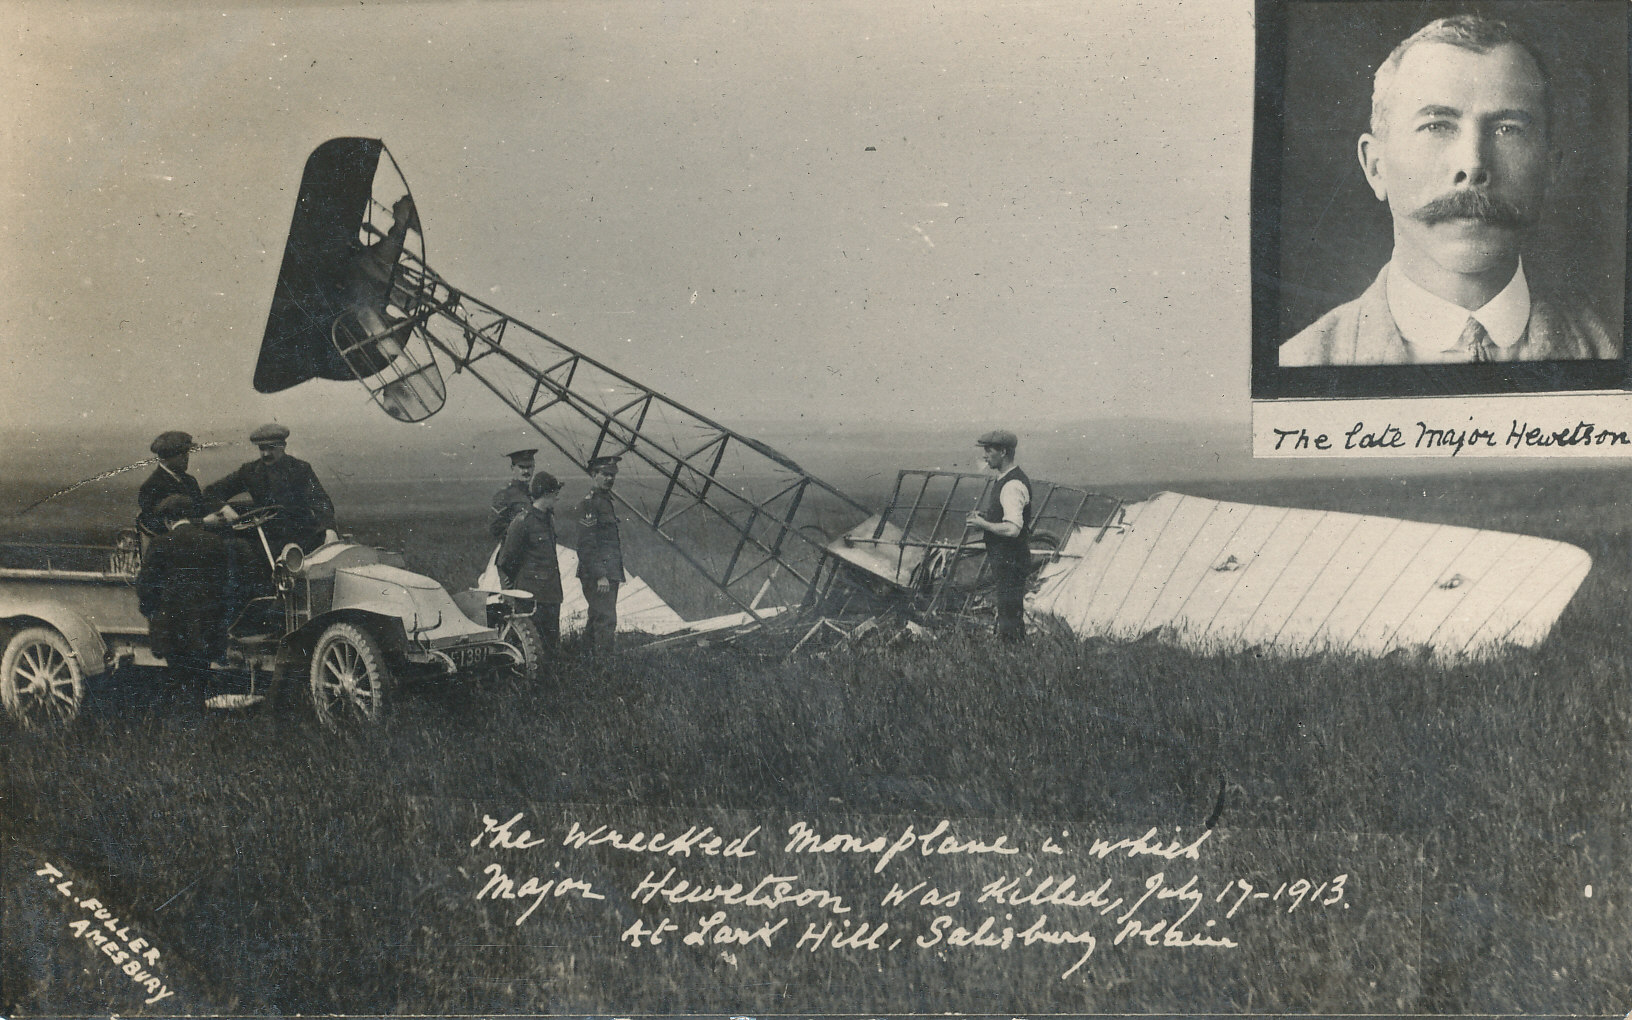 WILTSHIRE, Aviation, wreck of the monoplane in which Major Hewetson was killed, 17th July 1913 at